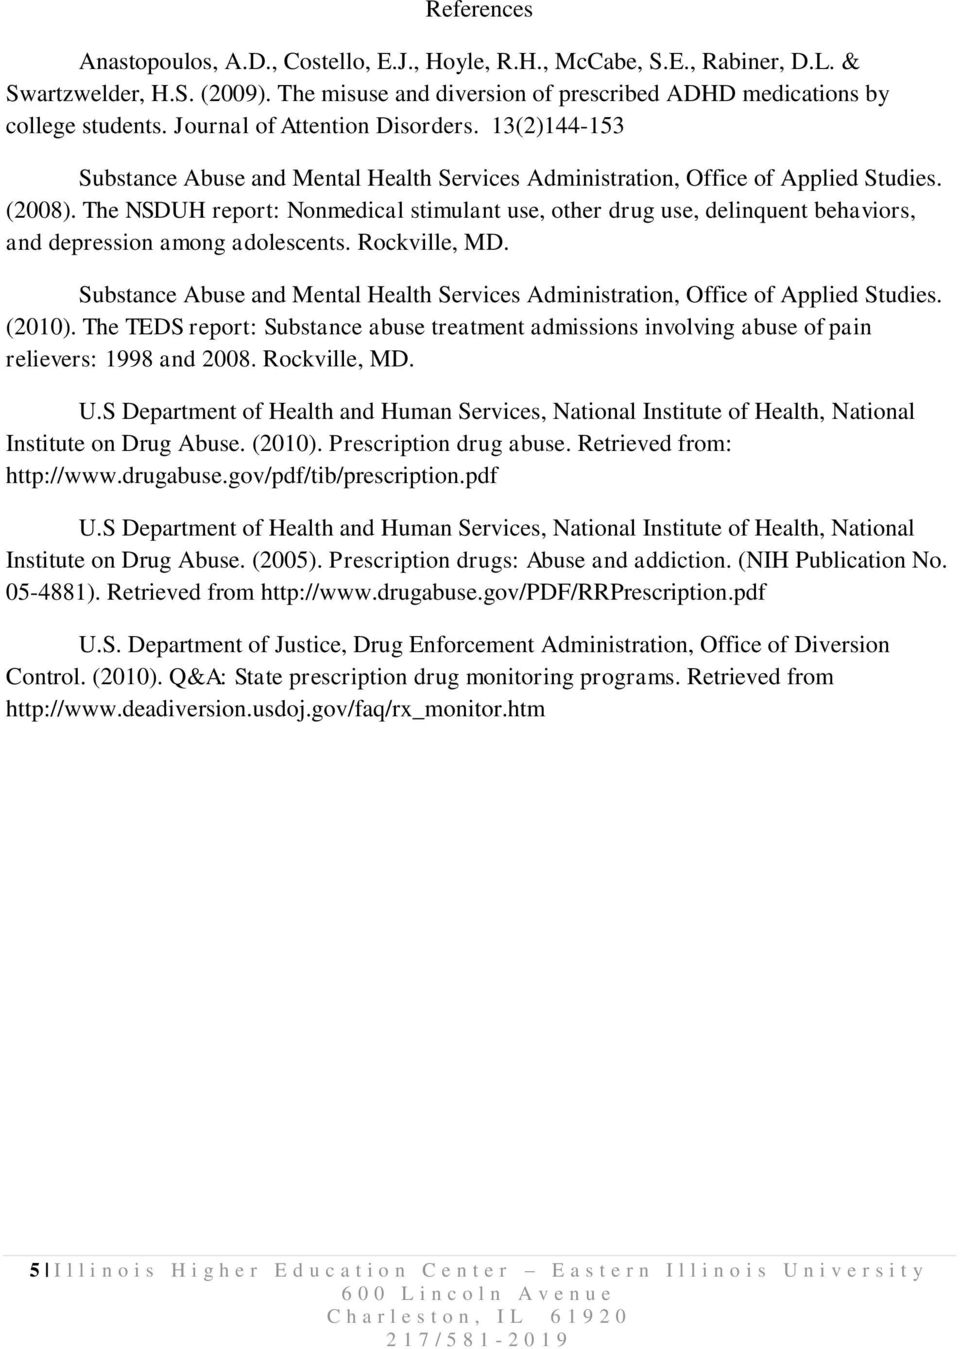 The NSDUH report: Nonmedical stimulant use, other drug use, delinquent behaviors, and depression among adolescents. Rockville, MD.